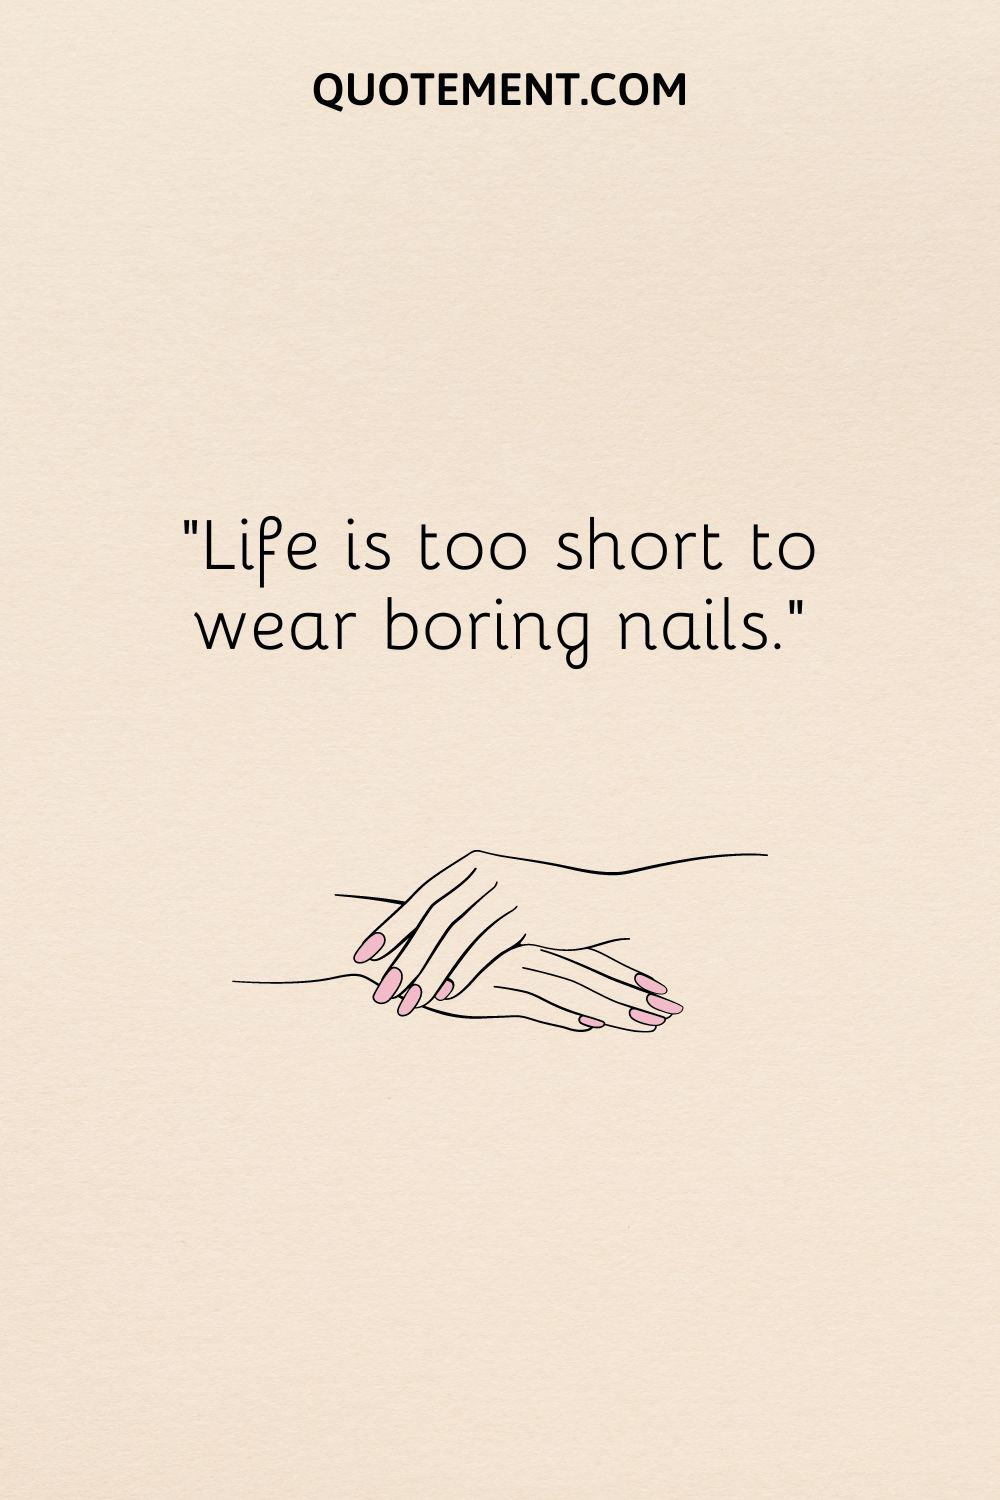 Life is too short to wear boring nails